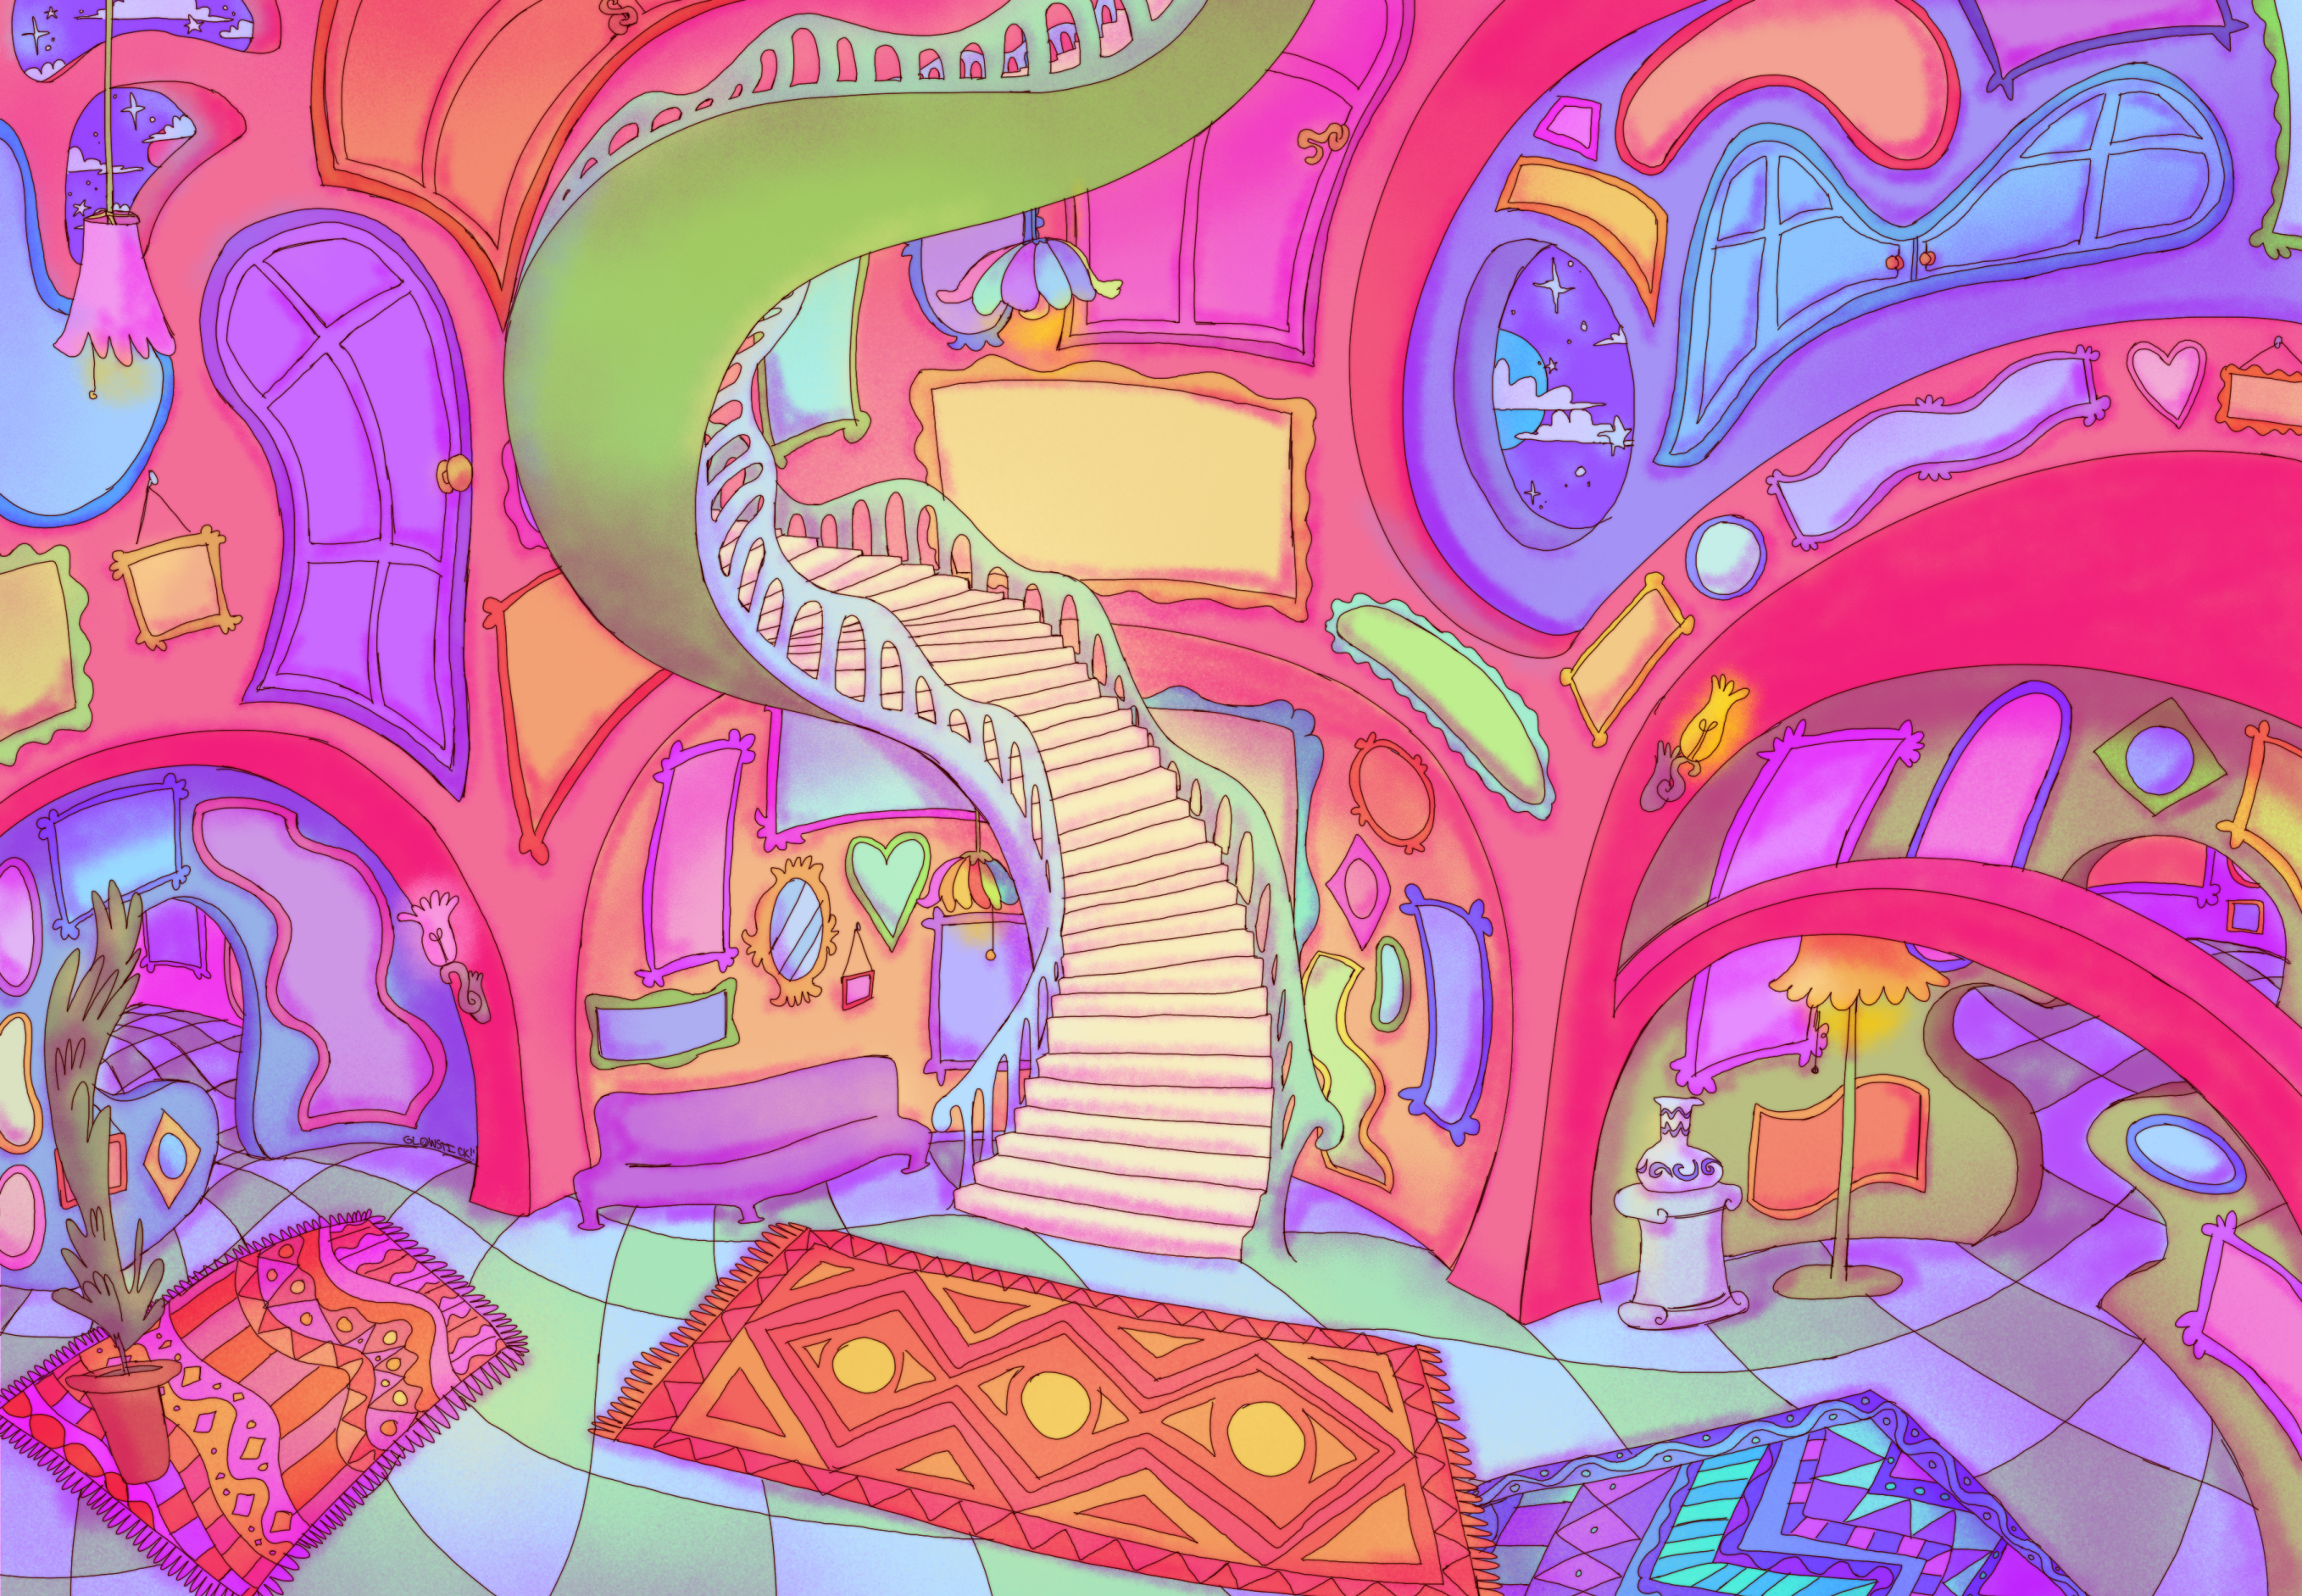 A drawing depicting a colorful and warped interior of a building. There are paintings covering the walls from floor to ceiling, and outer space can be seen outside the windows. There is a door on the left, a door on the right, and a staircase in the center.